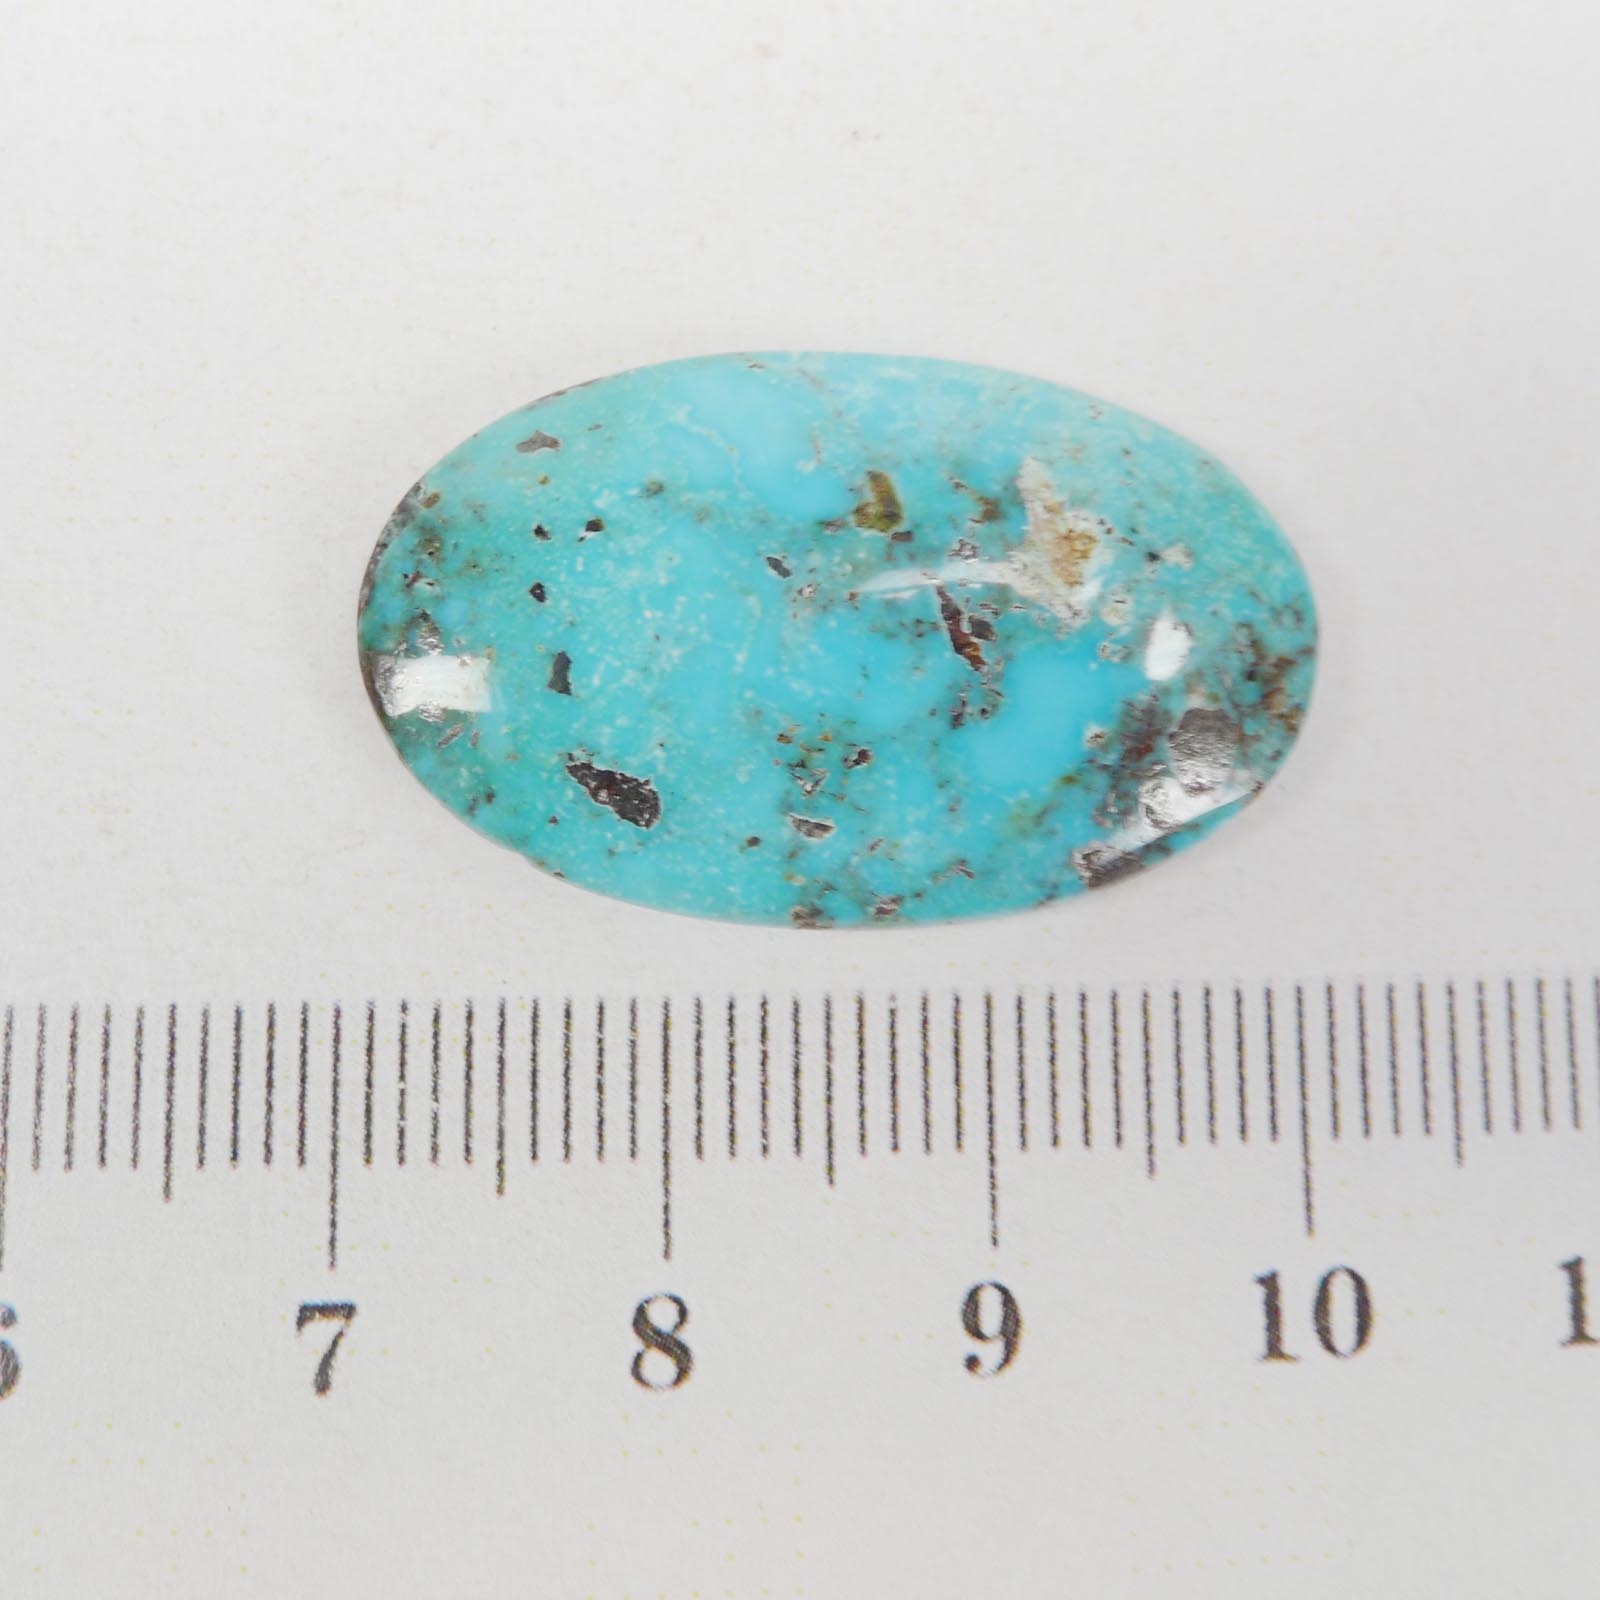 Persian Turquoise 100% Natural 2 Oval Cabochon 27 TCW | eBay